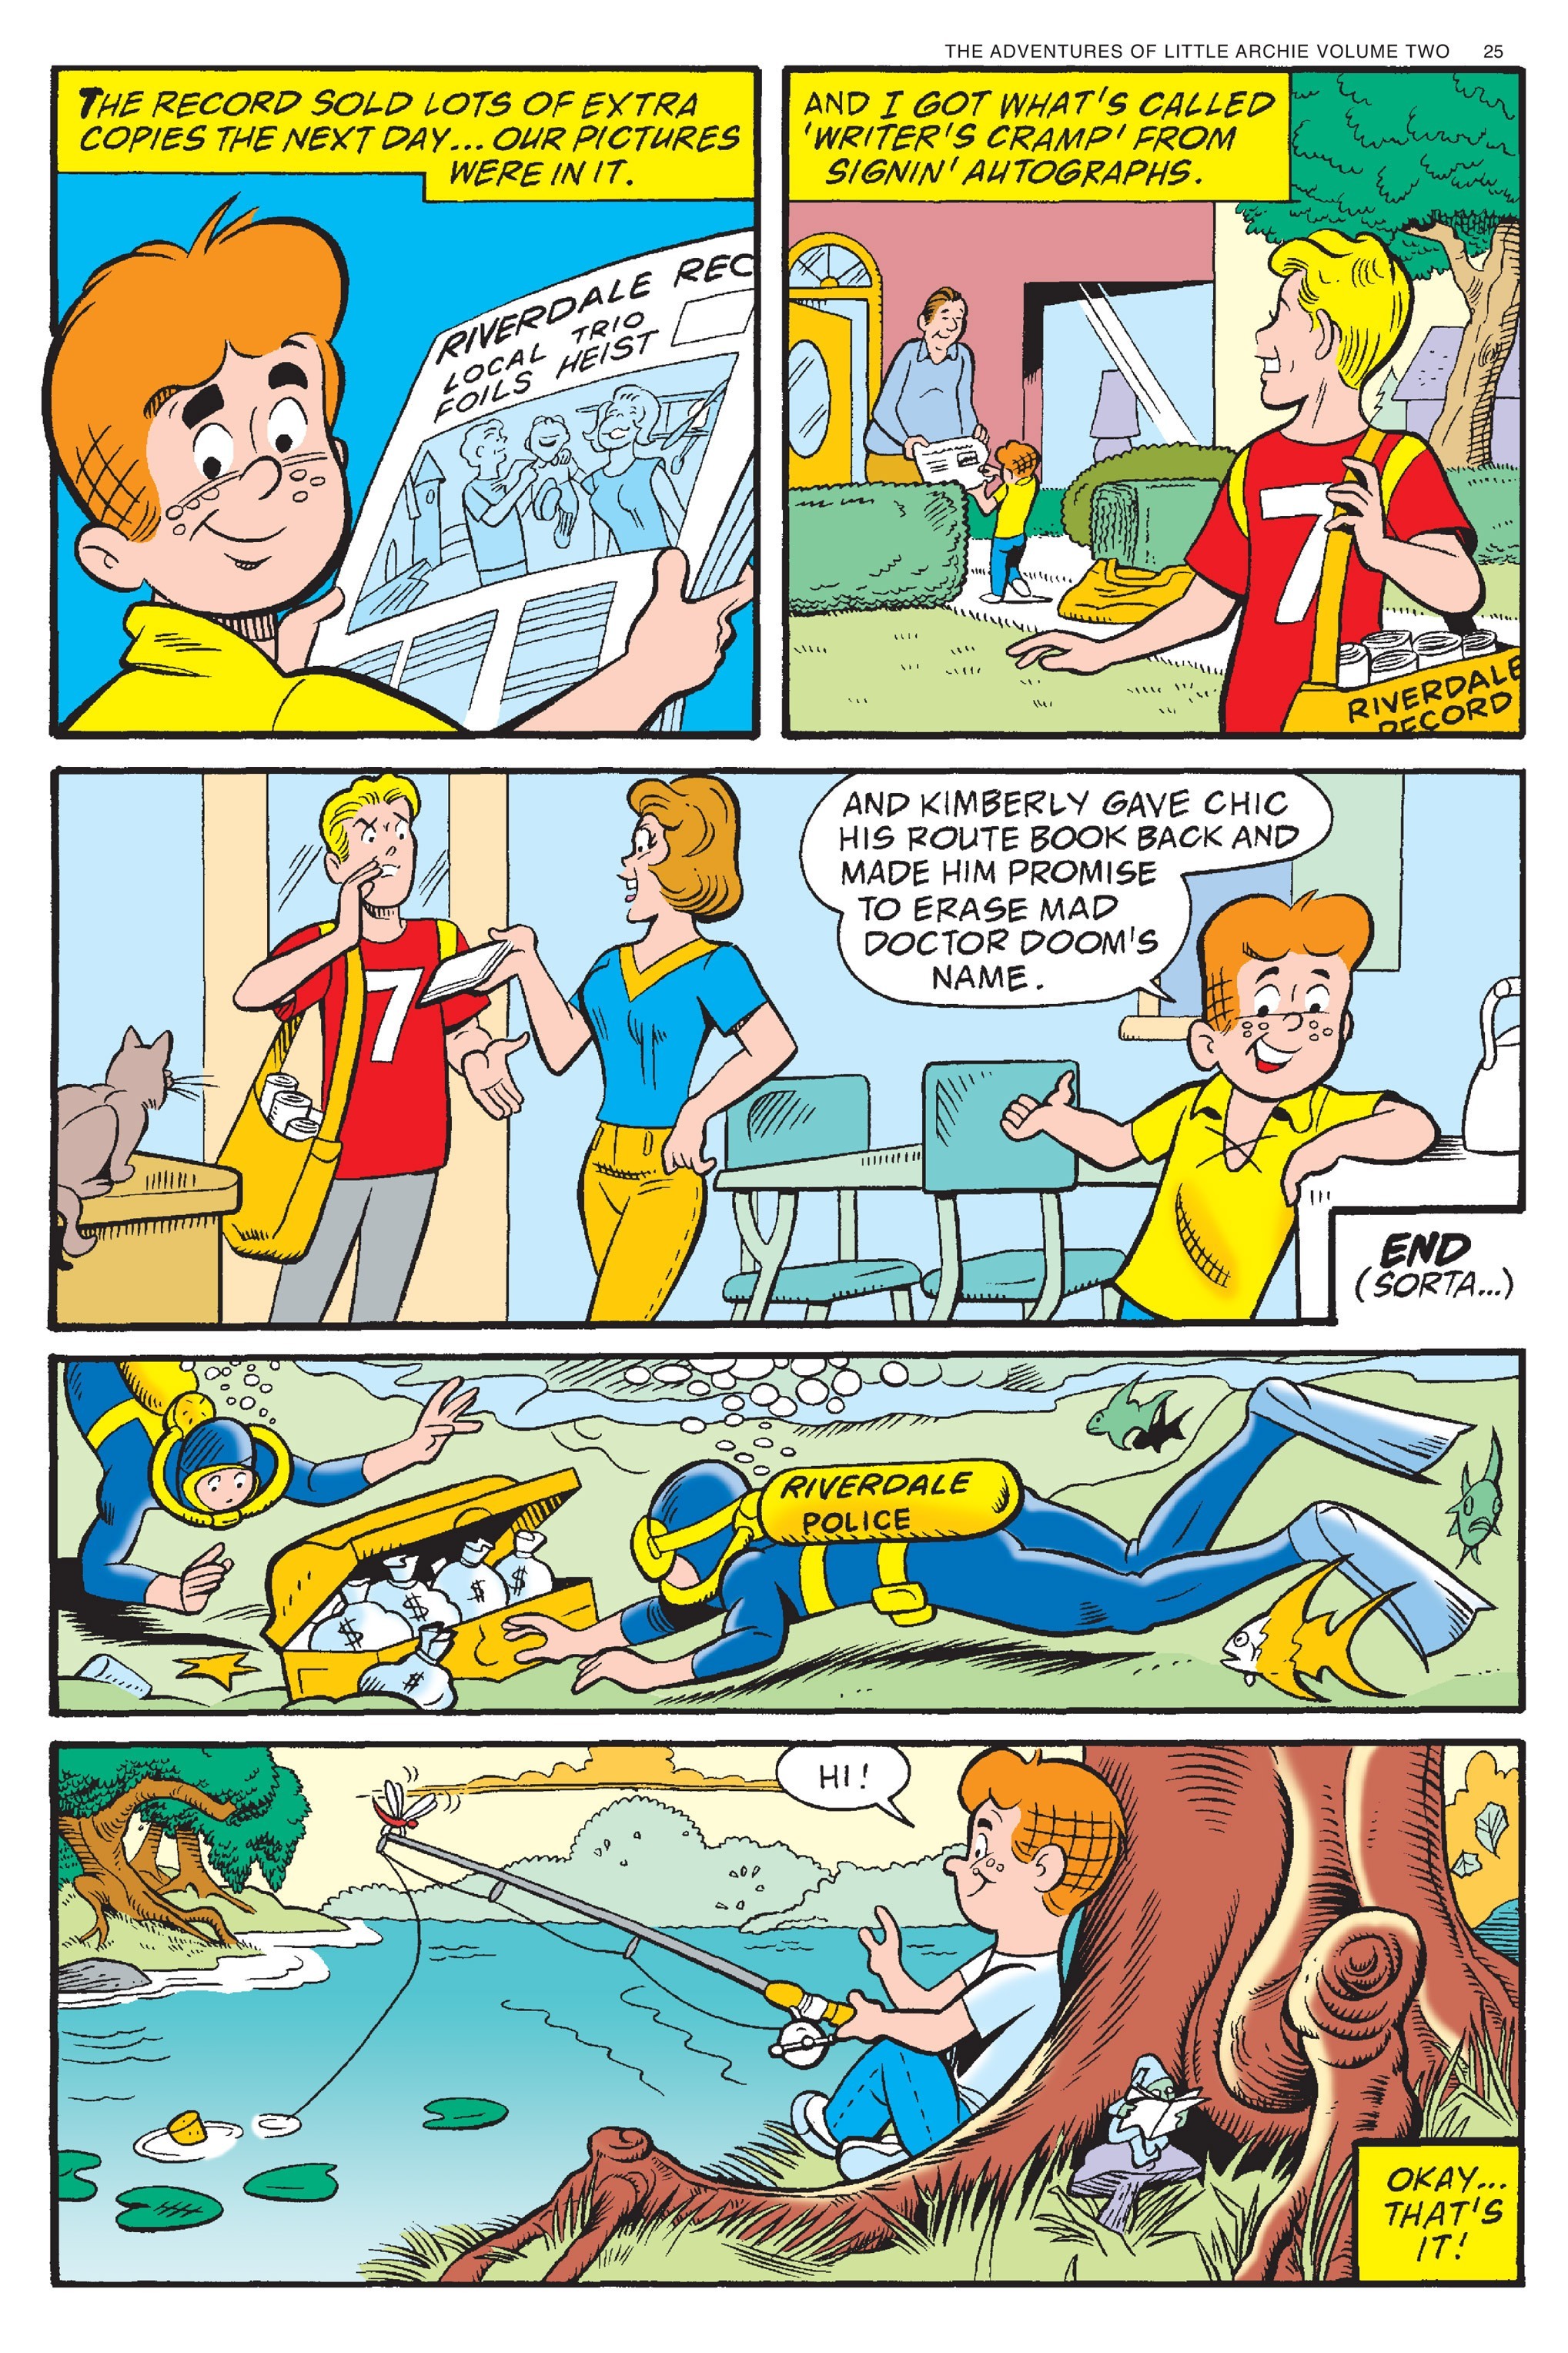 Read online Adventures of Little Archie comic -  Issue # TPB 2 - 26